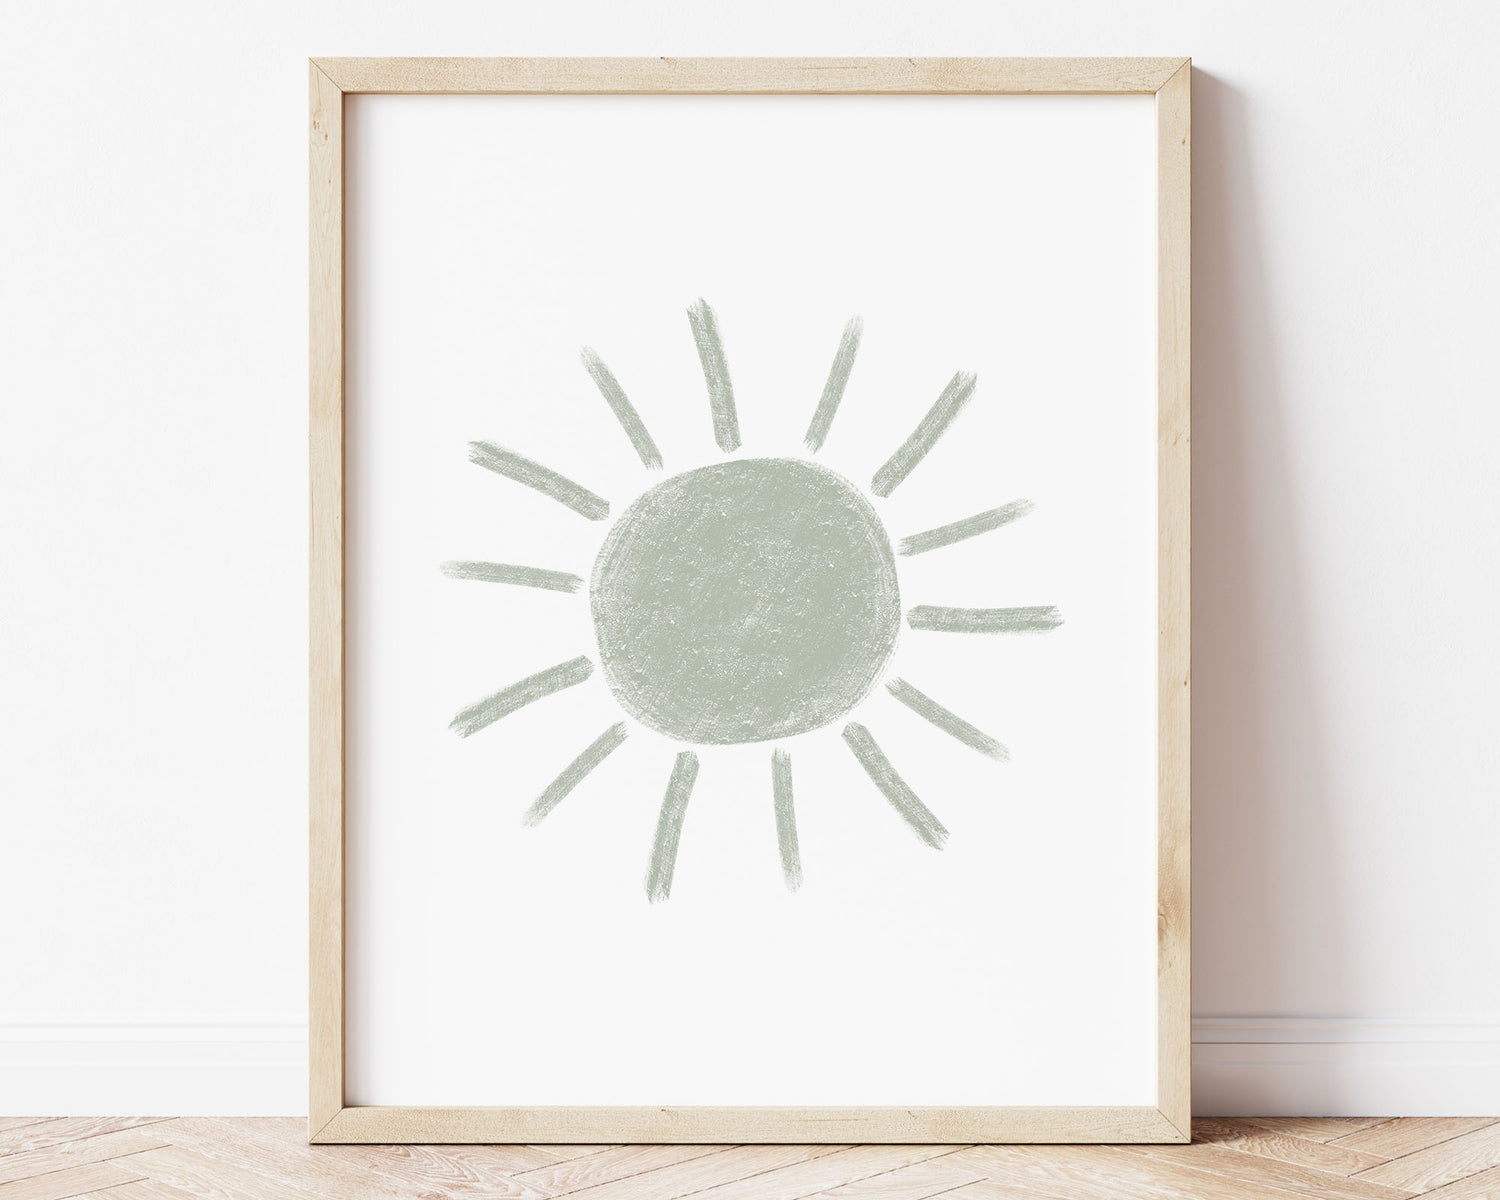 Sage green abstract sun in chalky brushstroke illlustration style perfect for Baby Nursery Décor, Little Boys Bedroom Wall Art, Toddler Girls Room Wall Hangings, Kiddos Bathroom Wall Art and Childrens Playroom Décor.